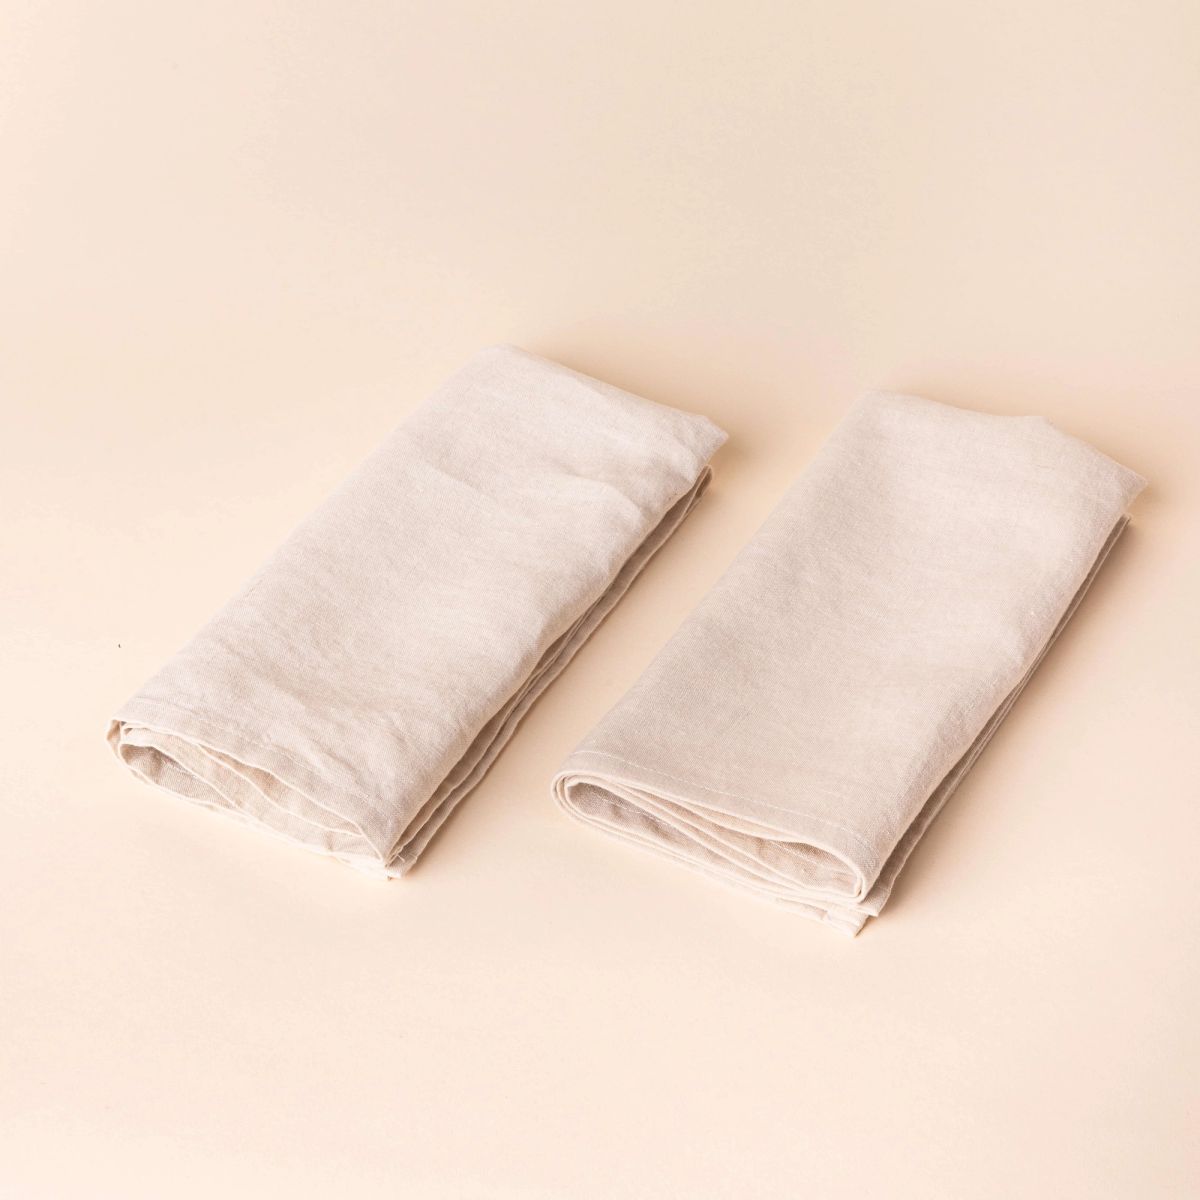 Two off-white napkins folded into rectangles side by side